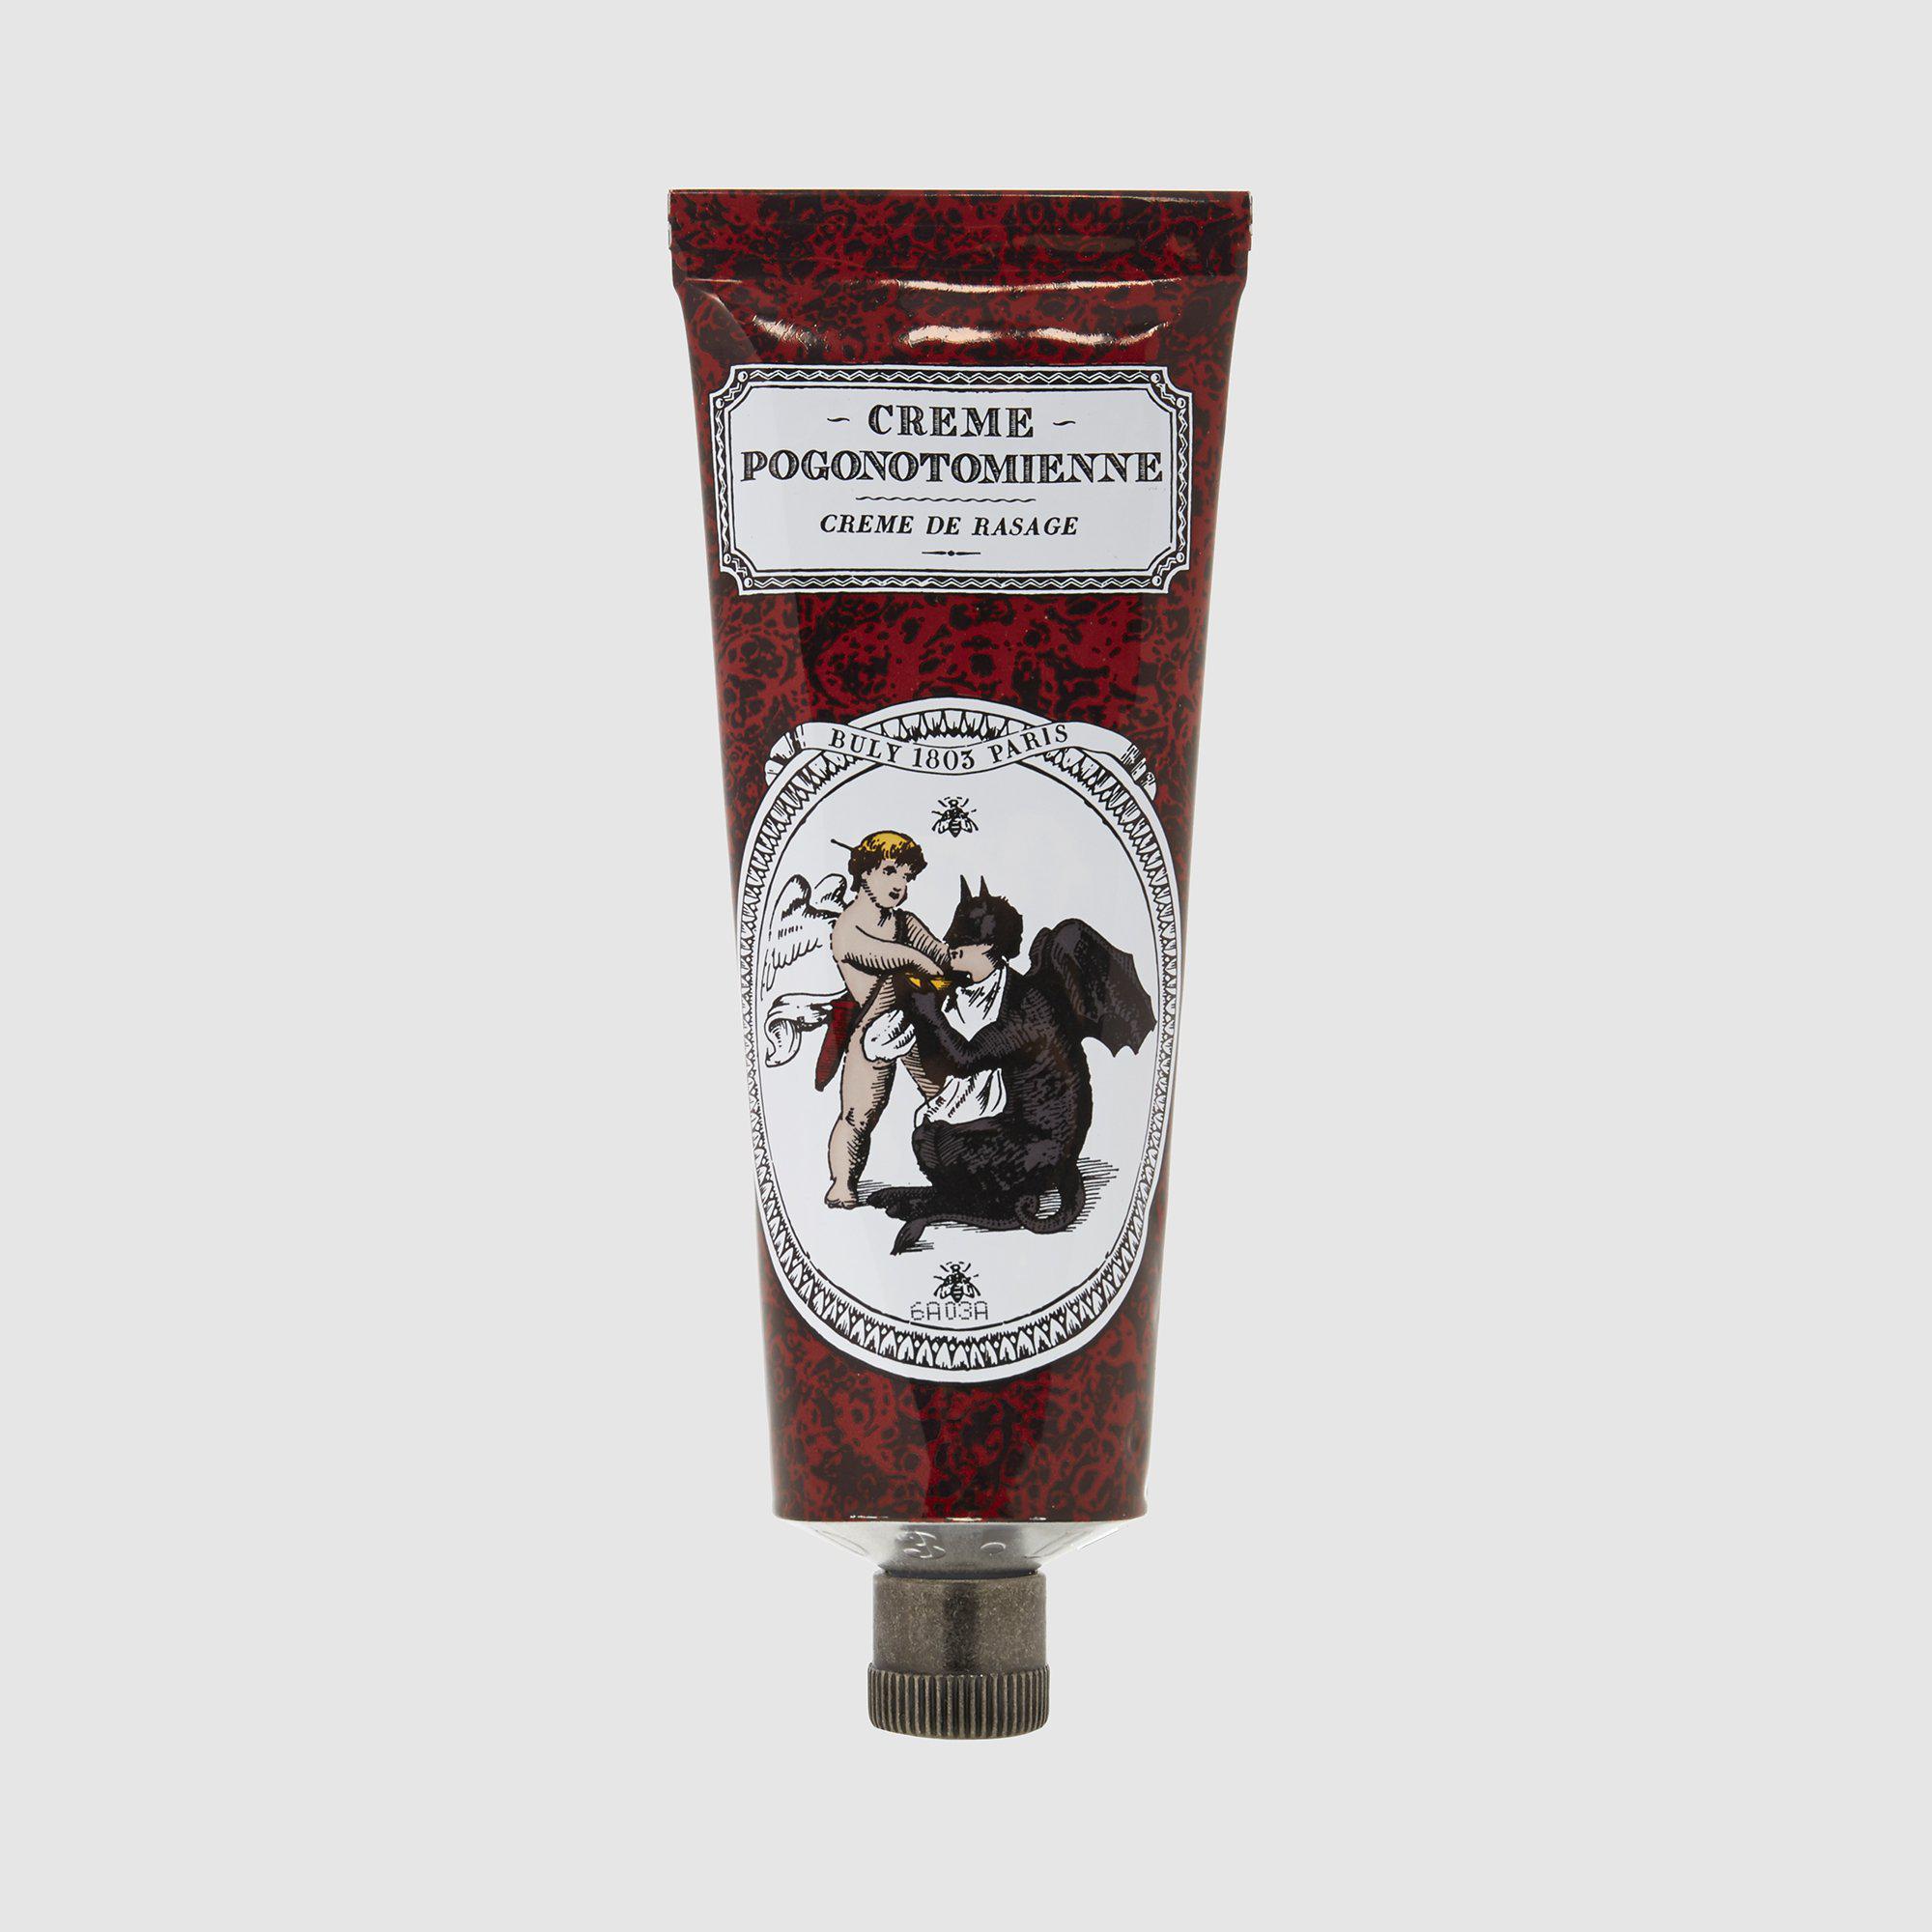 Buly 1803 Creme Pogonotomienne, Shaving Cream 75ml by BULY 1803